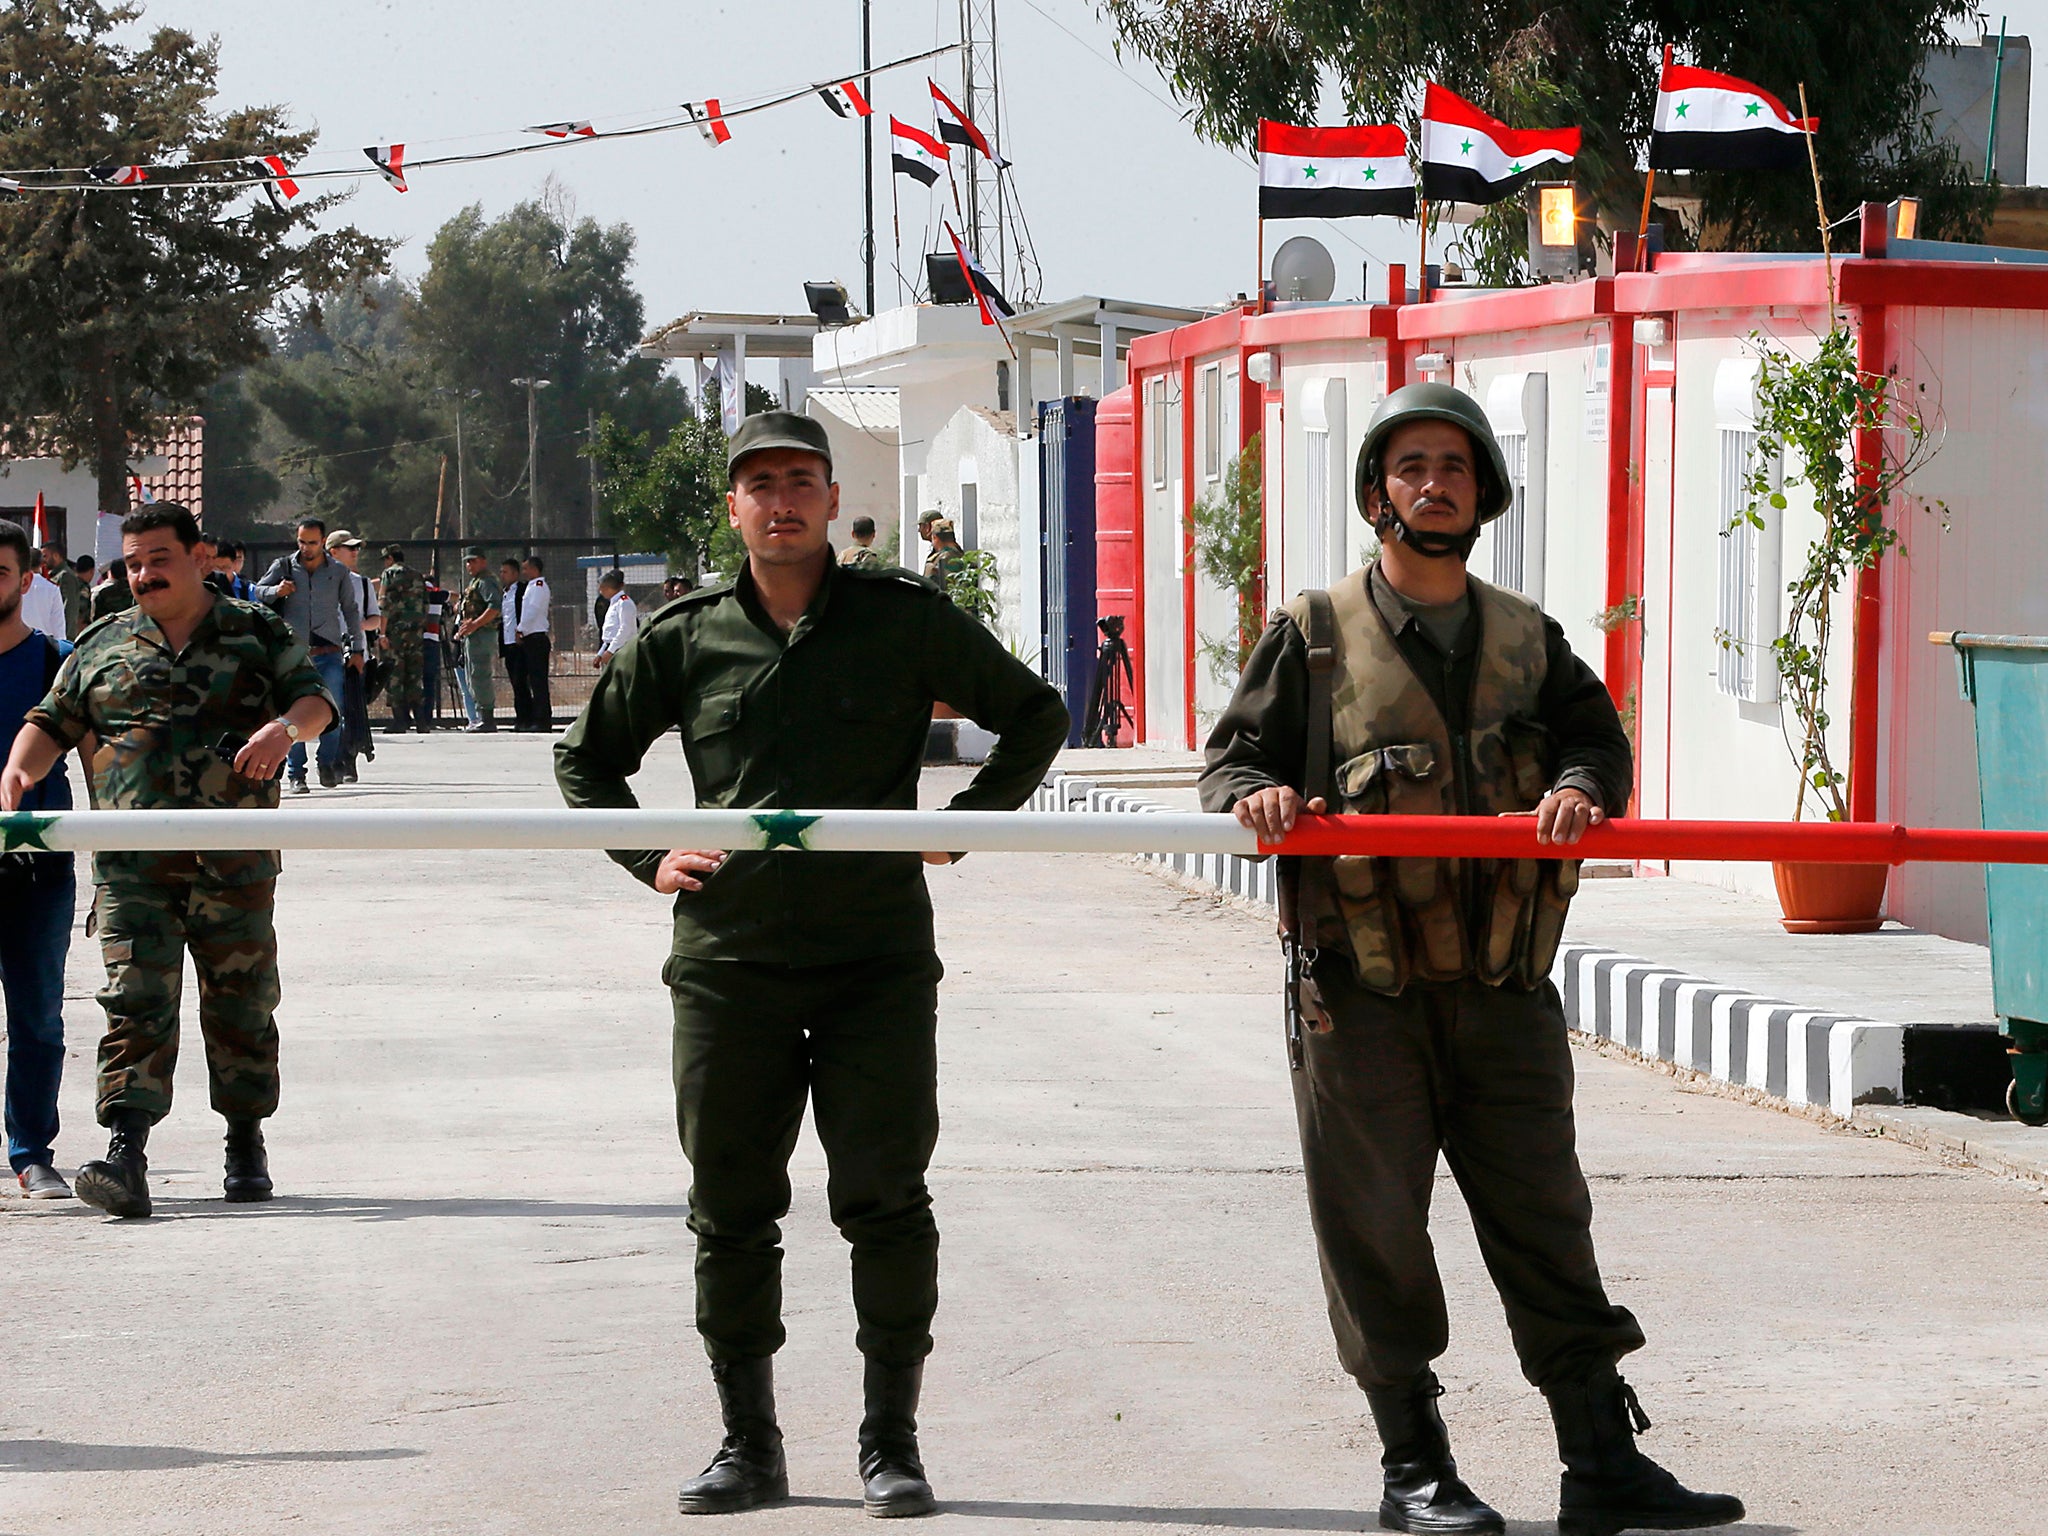 Syrian army officers guard their side of the Quneitra border crossing to the Israeli annexed-Golan Heights during its reopening